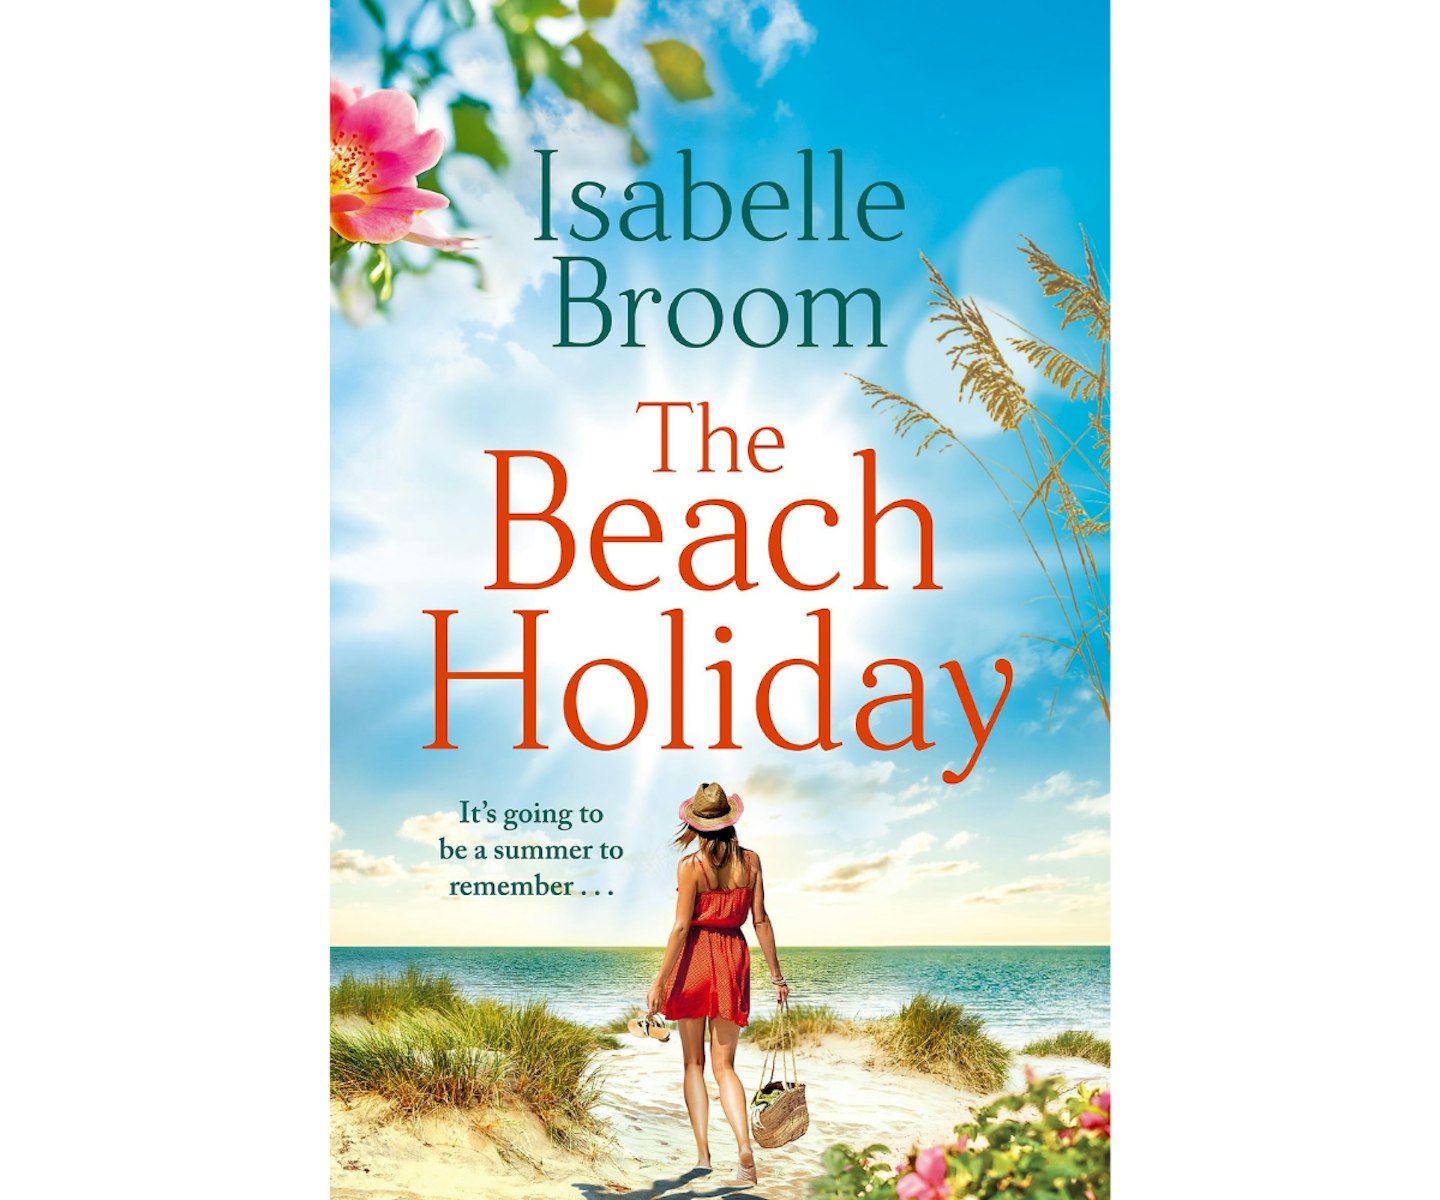 The Beach Holiday by Isabelle Broom